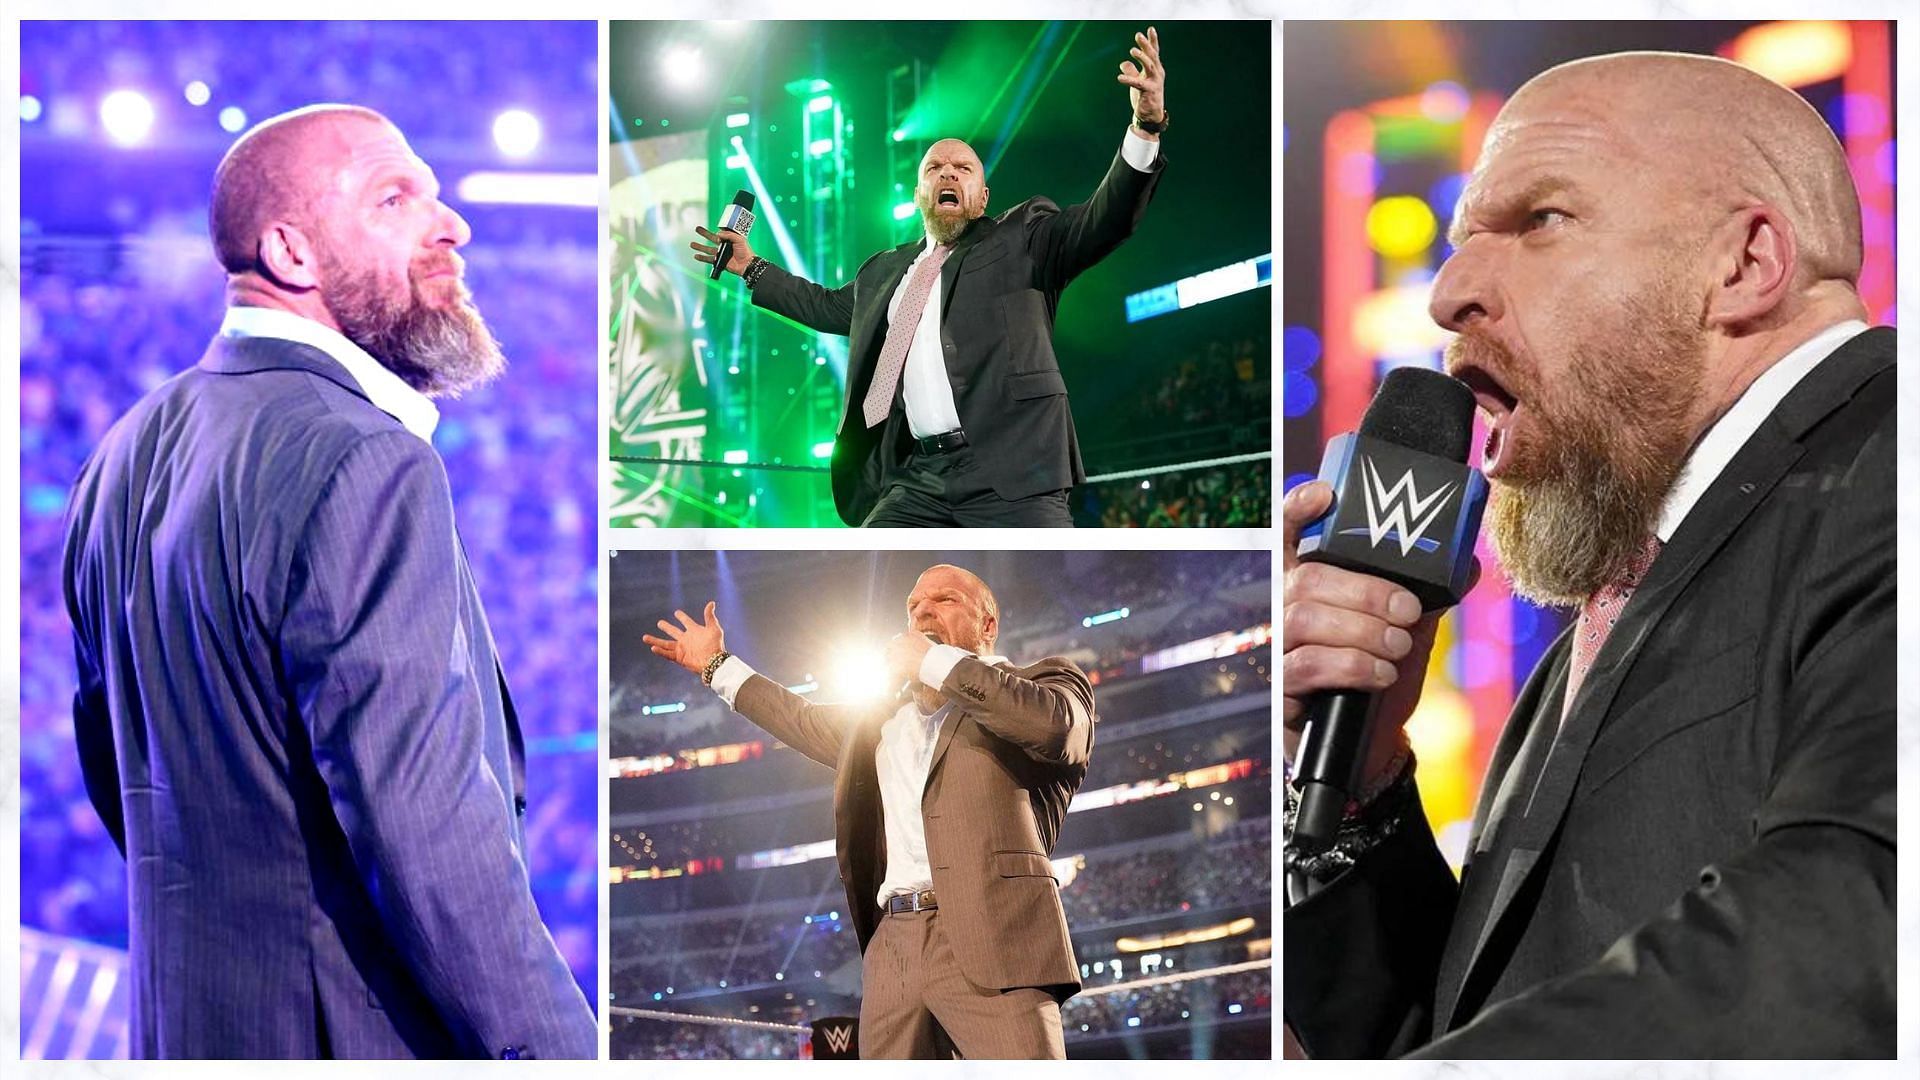 Triple H lives up to his game-changer expectations